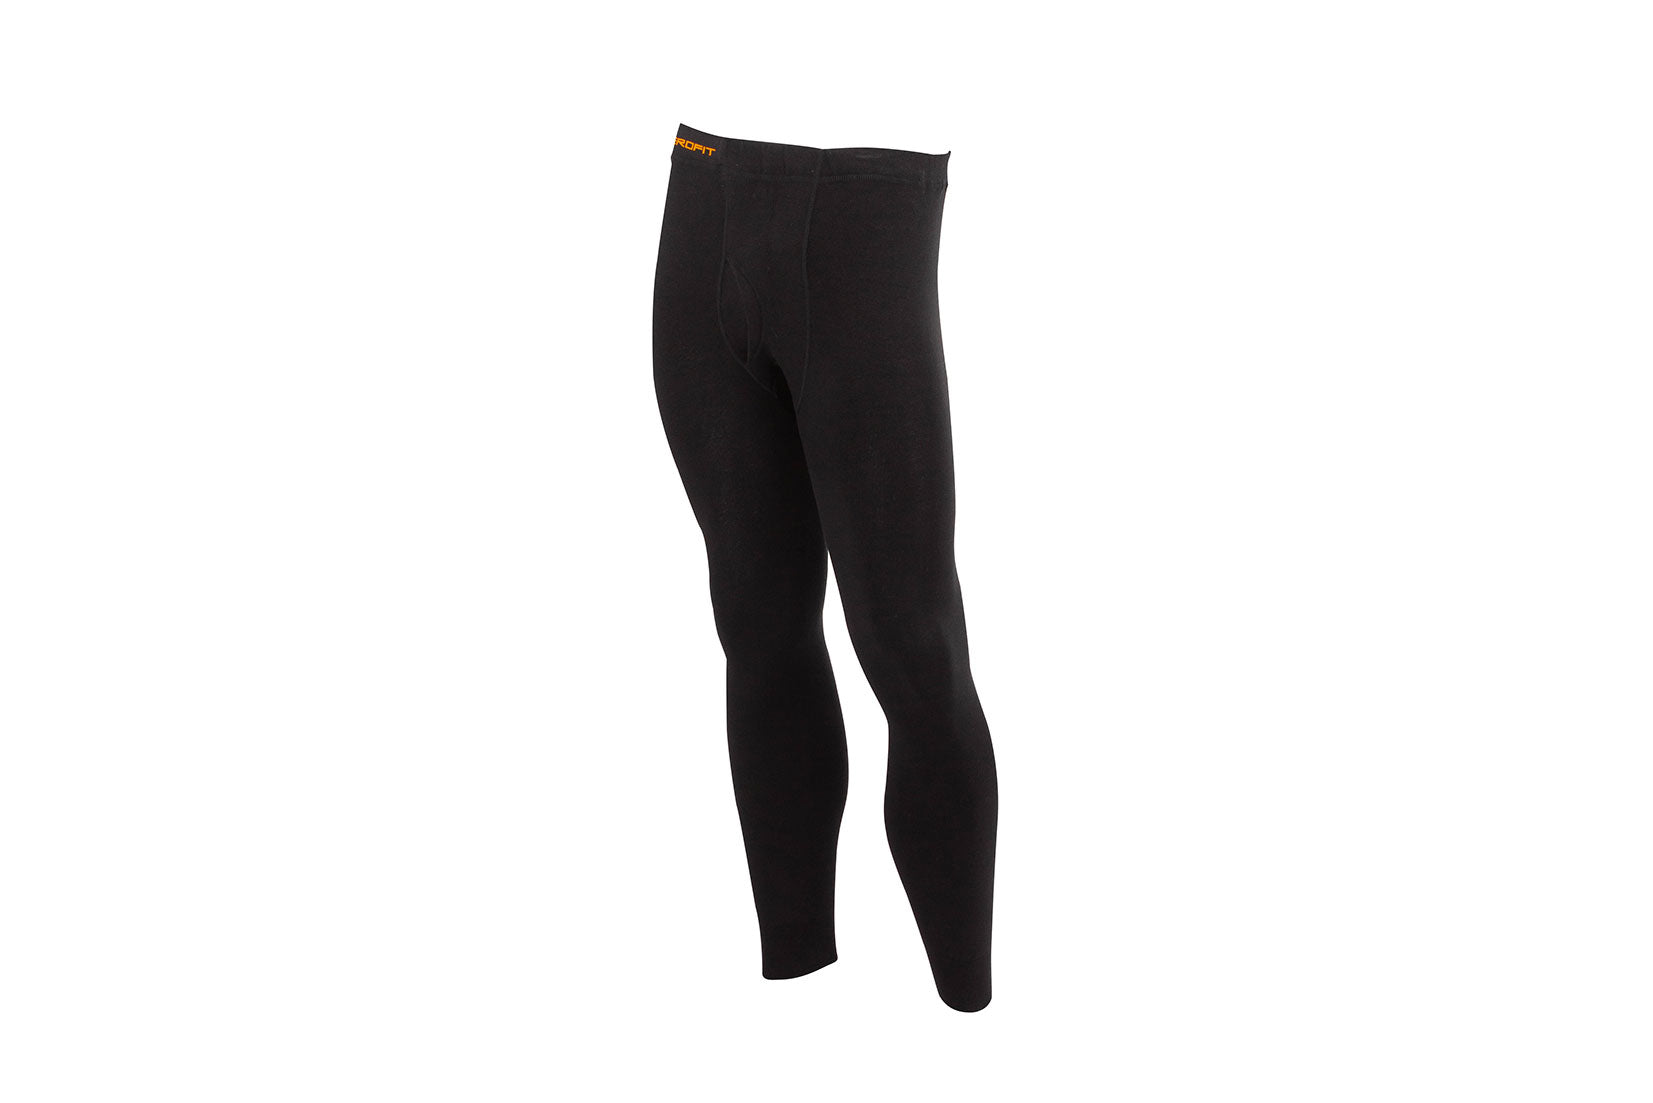 Unisex Compression Legging by Polartec® - 7th and Leroy